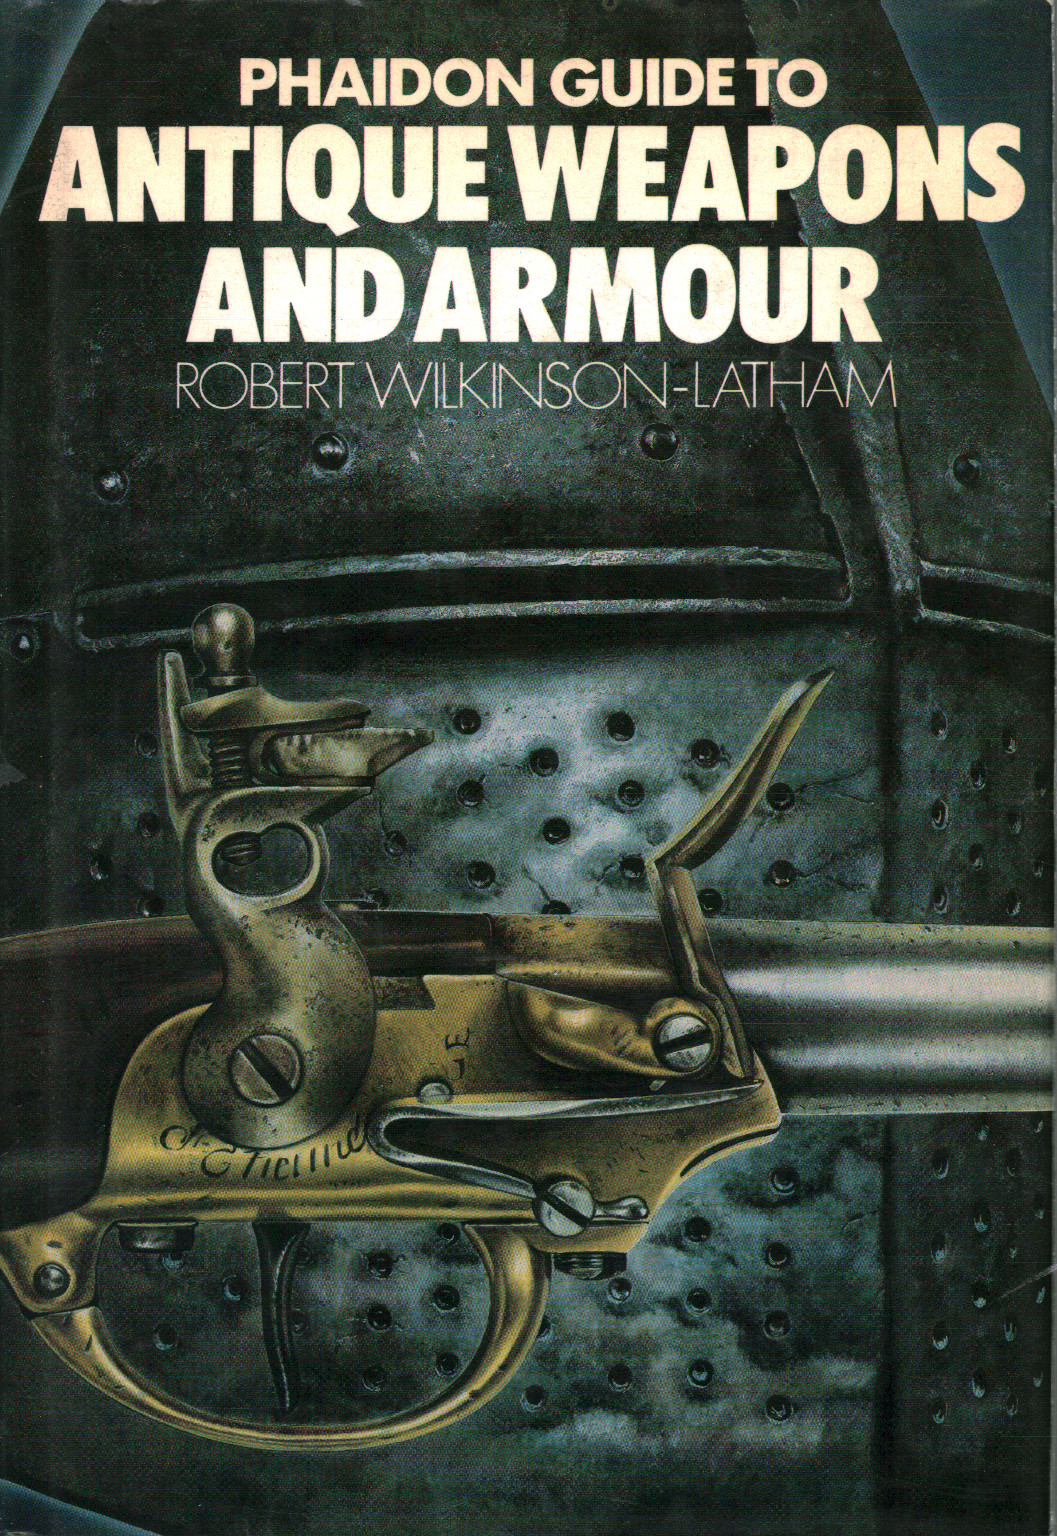 Phaidon guide to Antique weapons and armour, Robert Wilkinson-Latham